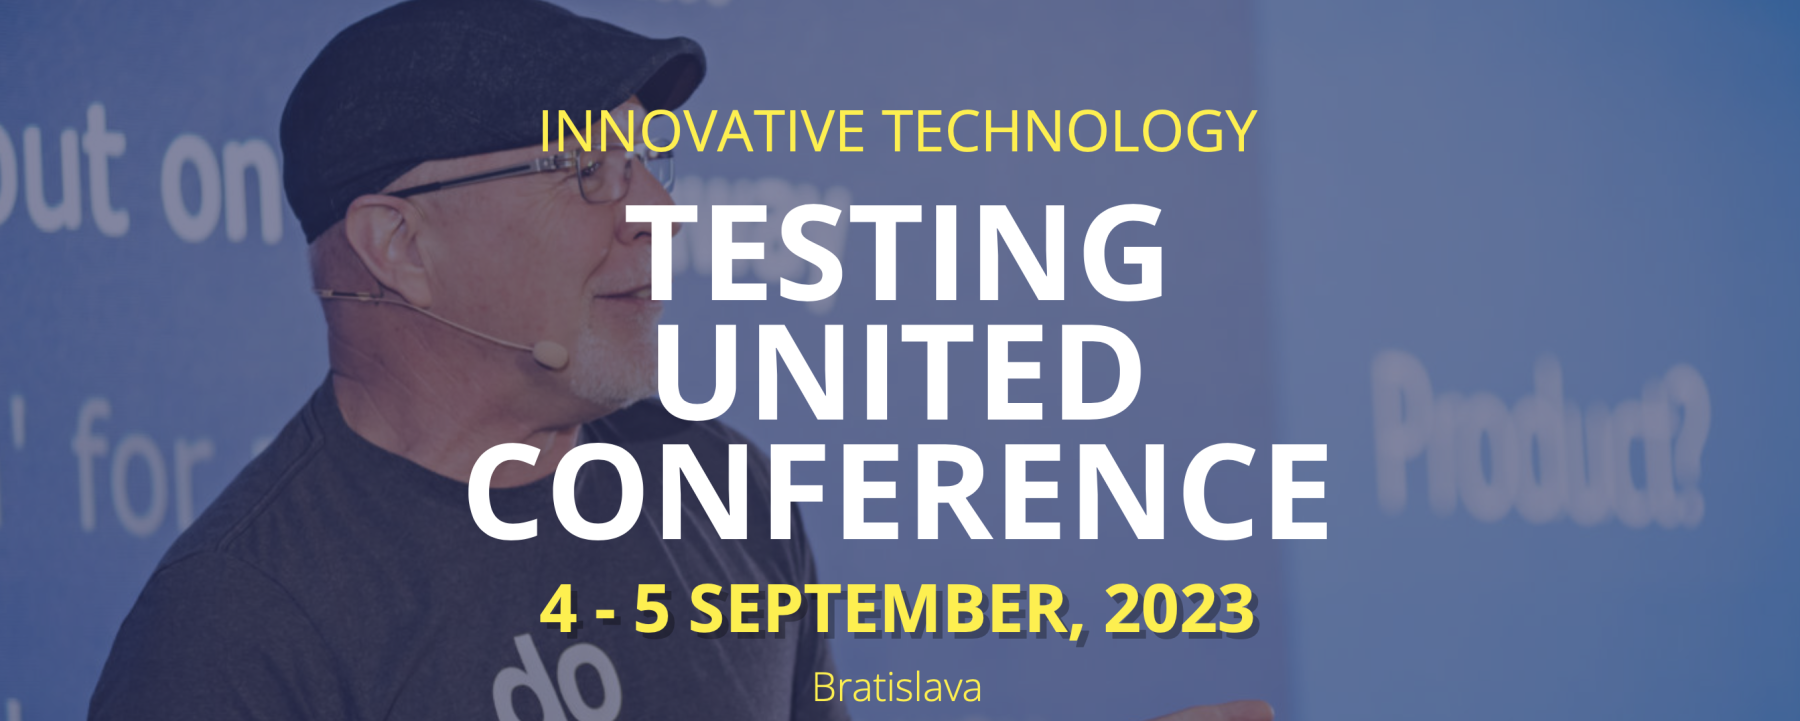 TESTING UNITED CONFERENCE 2023